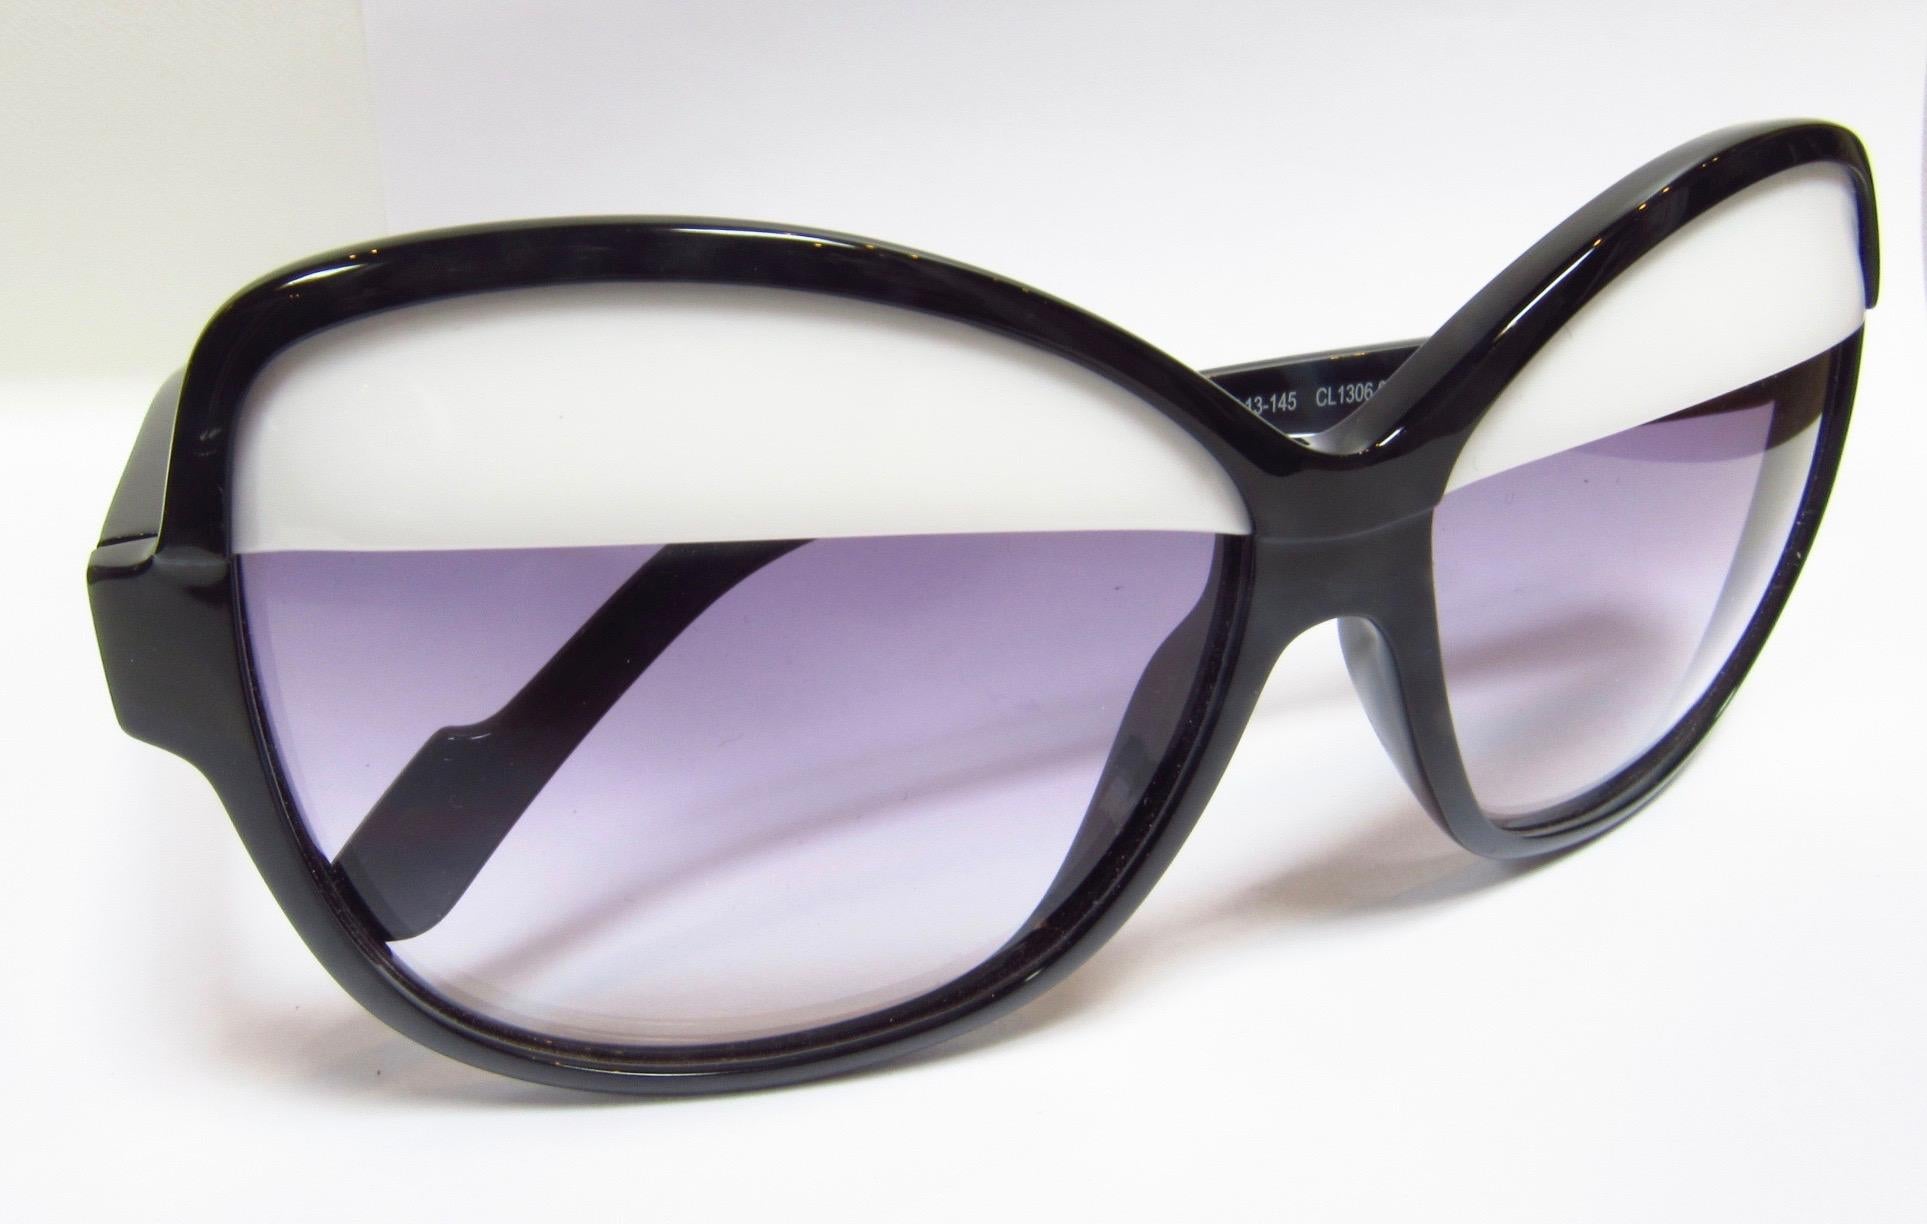 Black 'Paupier' sunglasses from Courrèges featuring oversized frames and gradient lenses.